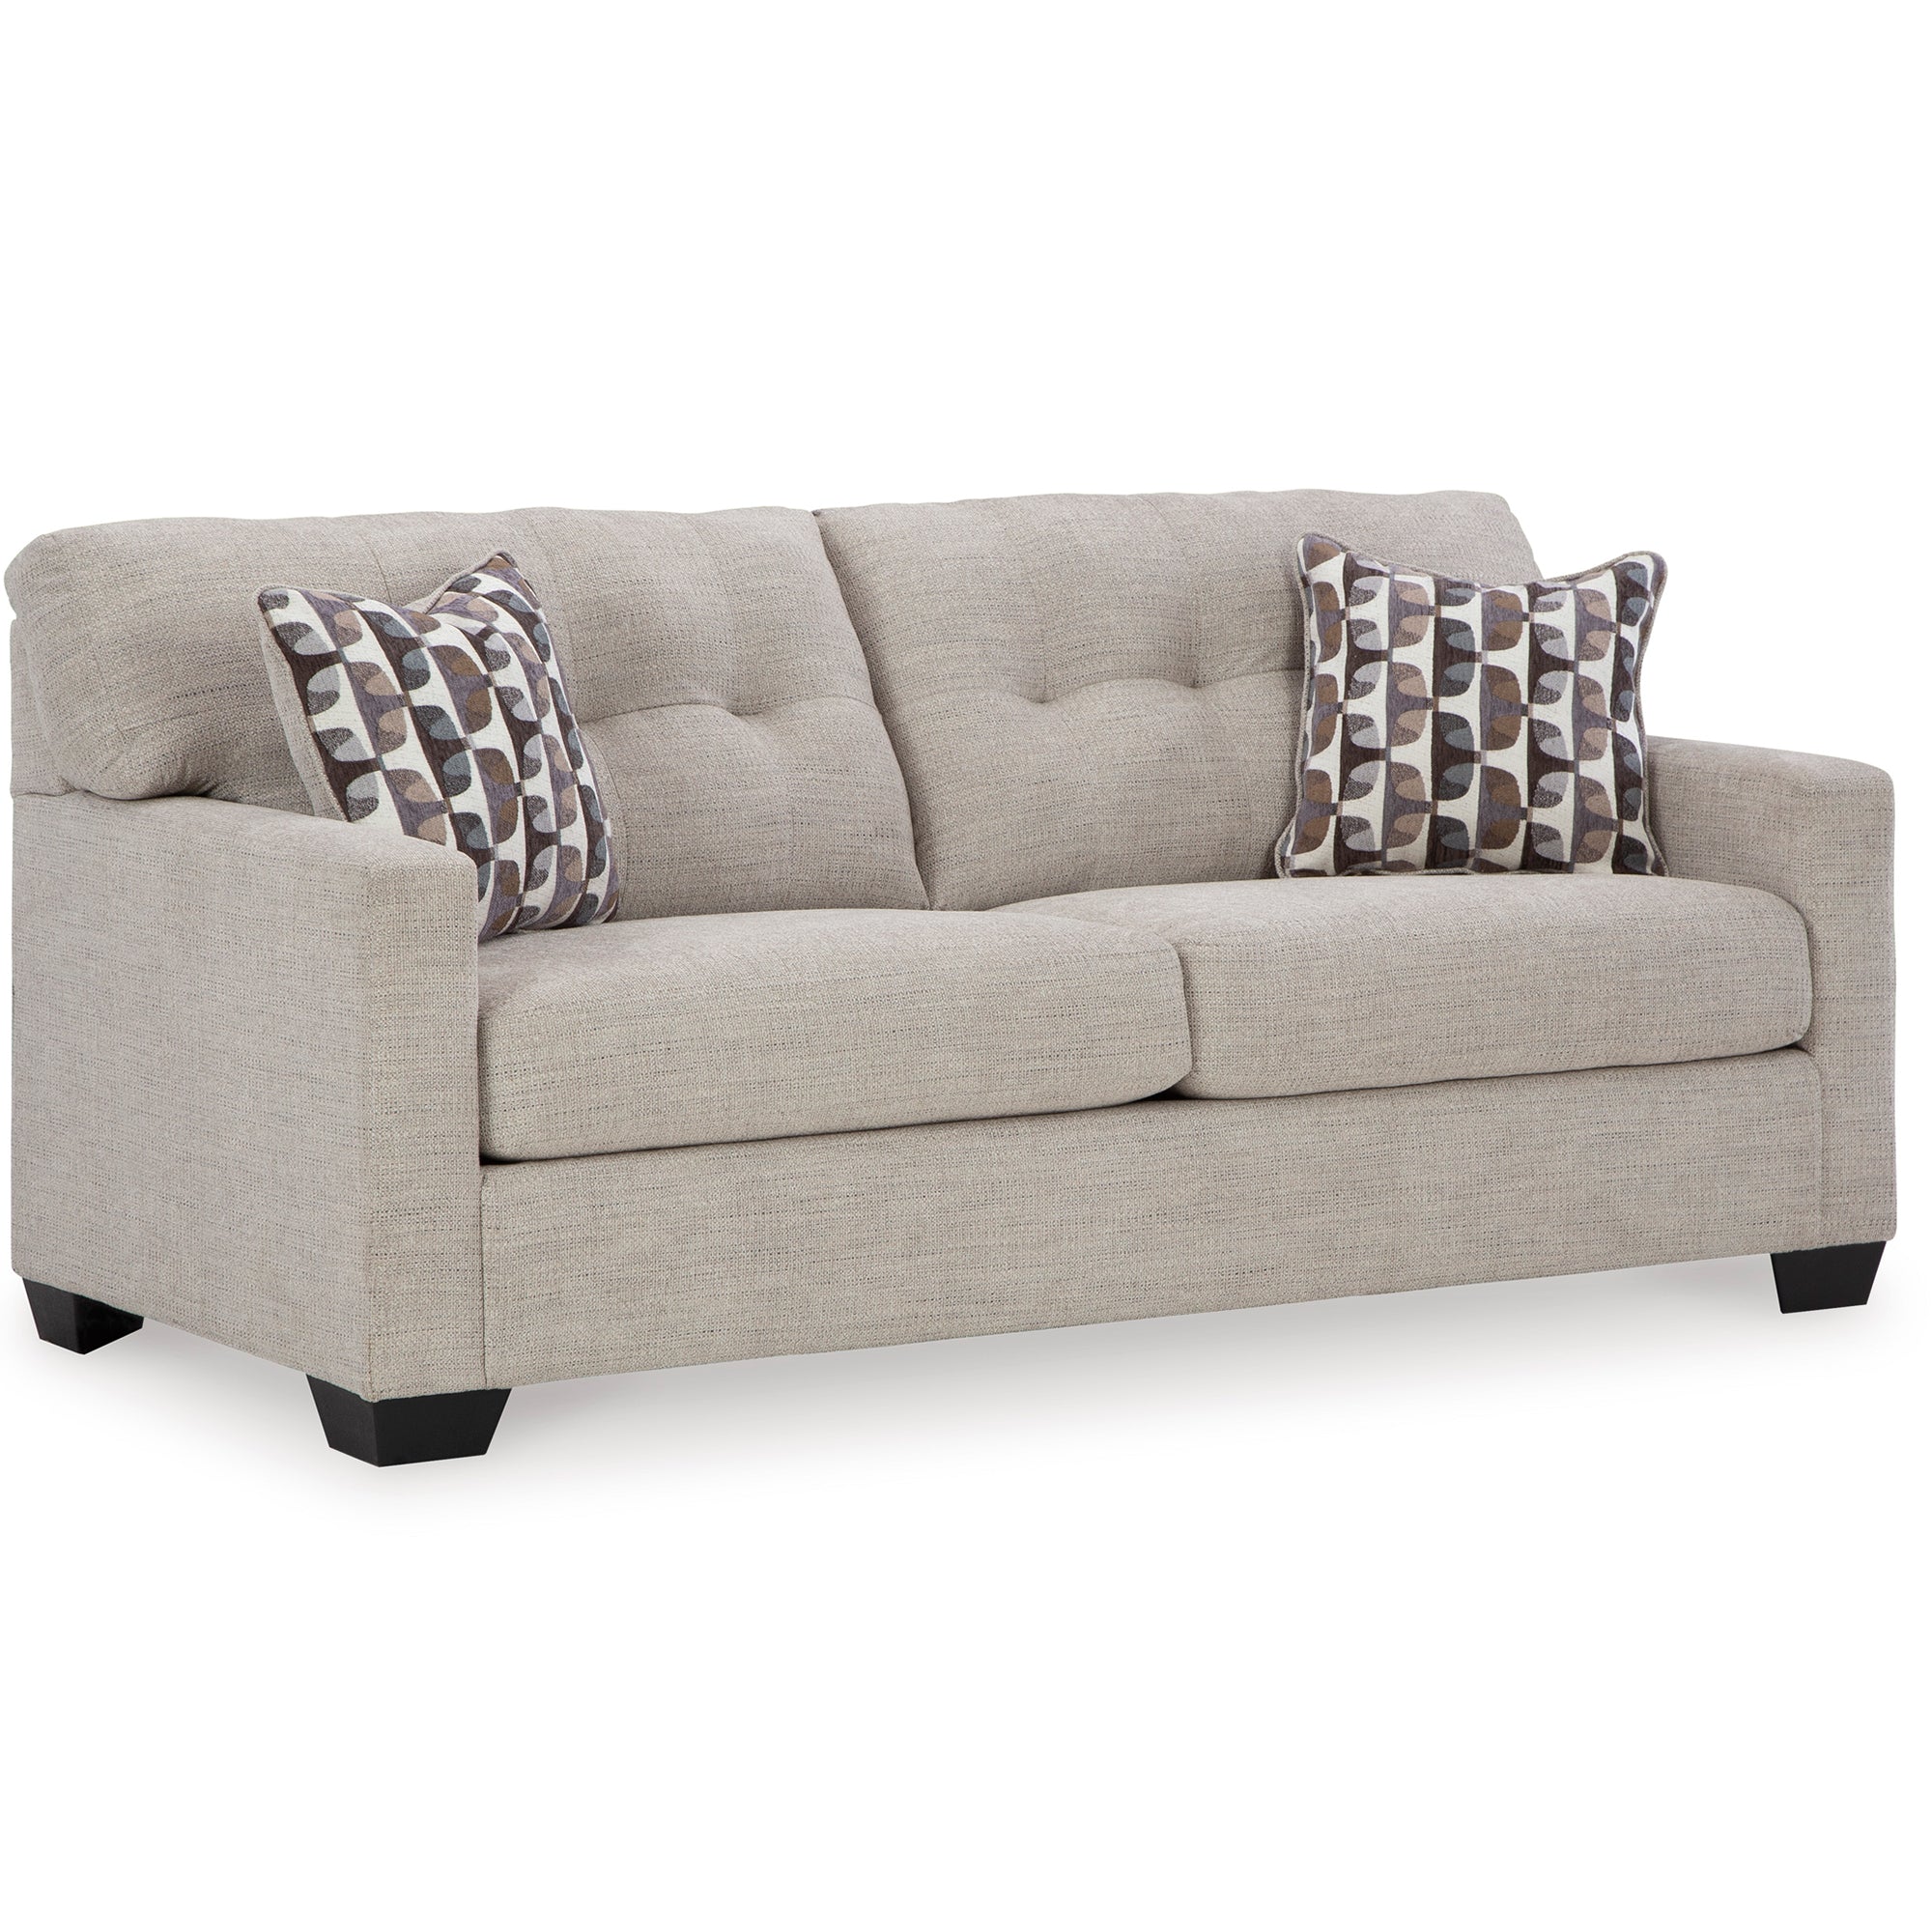 Pebble-colored Mahoney Sofa with a sleek, modern silhouette, suitable for any Milwaukee residence